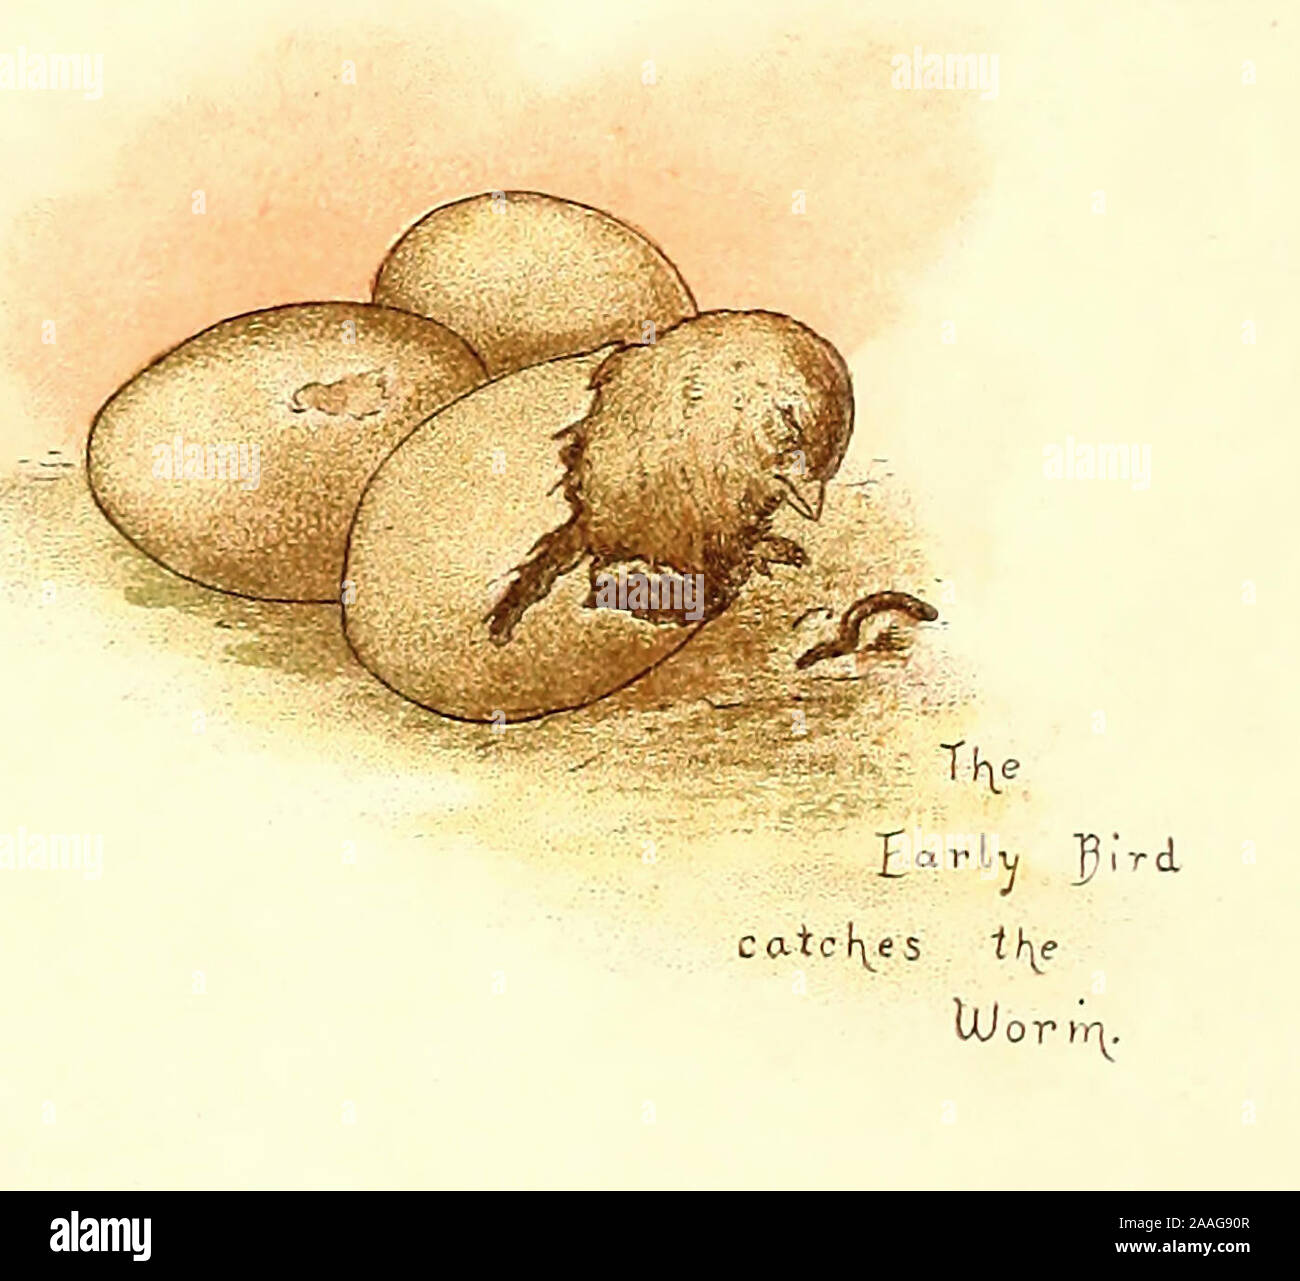 The Early Bird catches the Worm - Vintage Illustration of Old Proverb Stock Photo